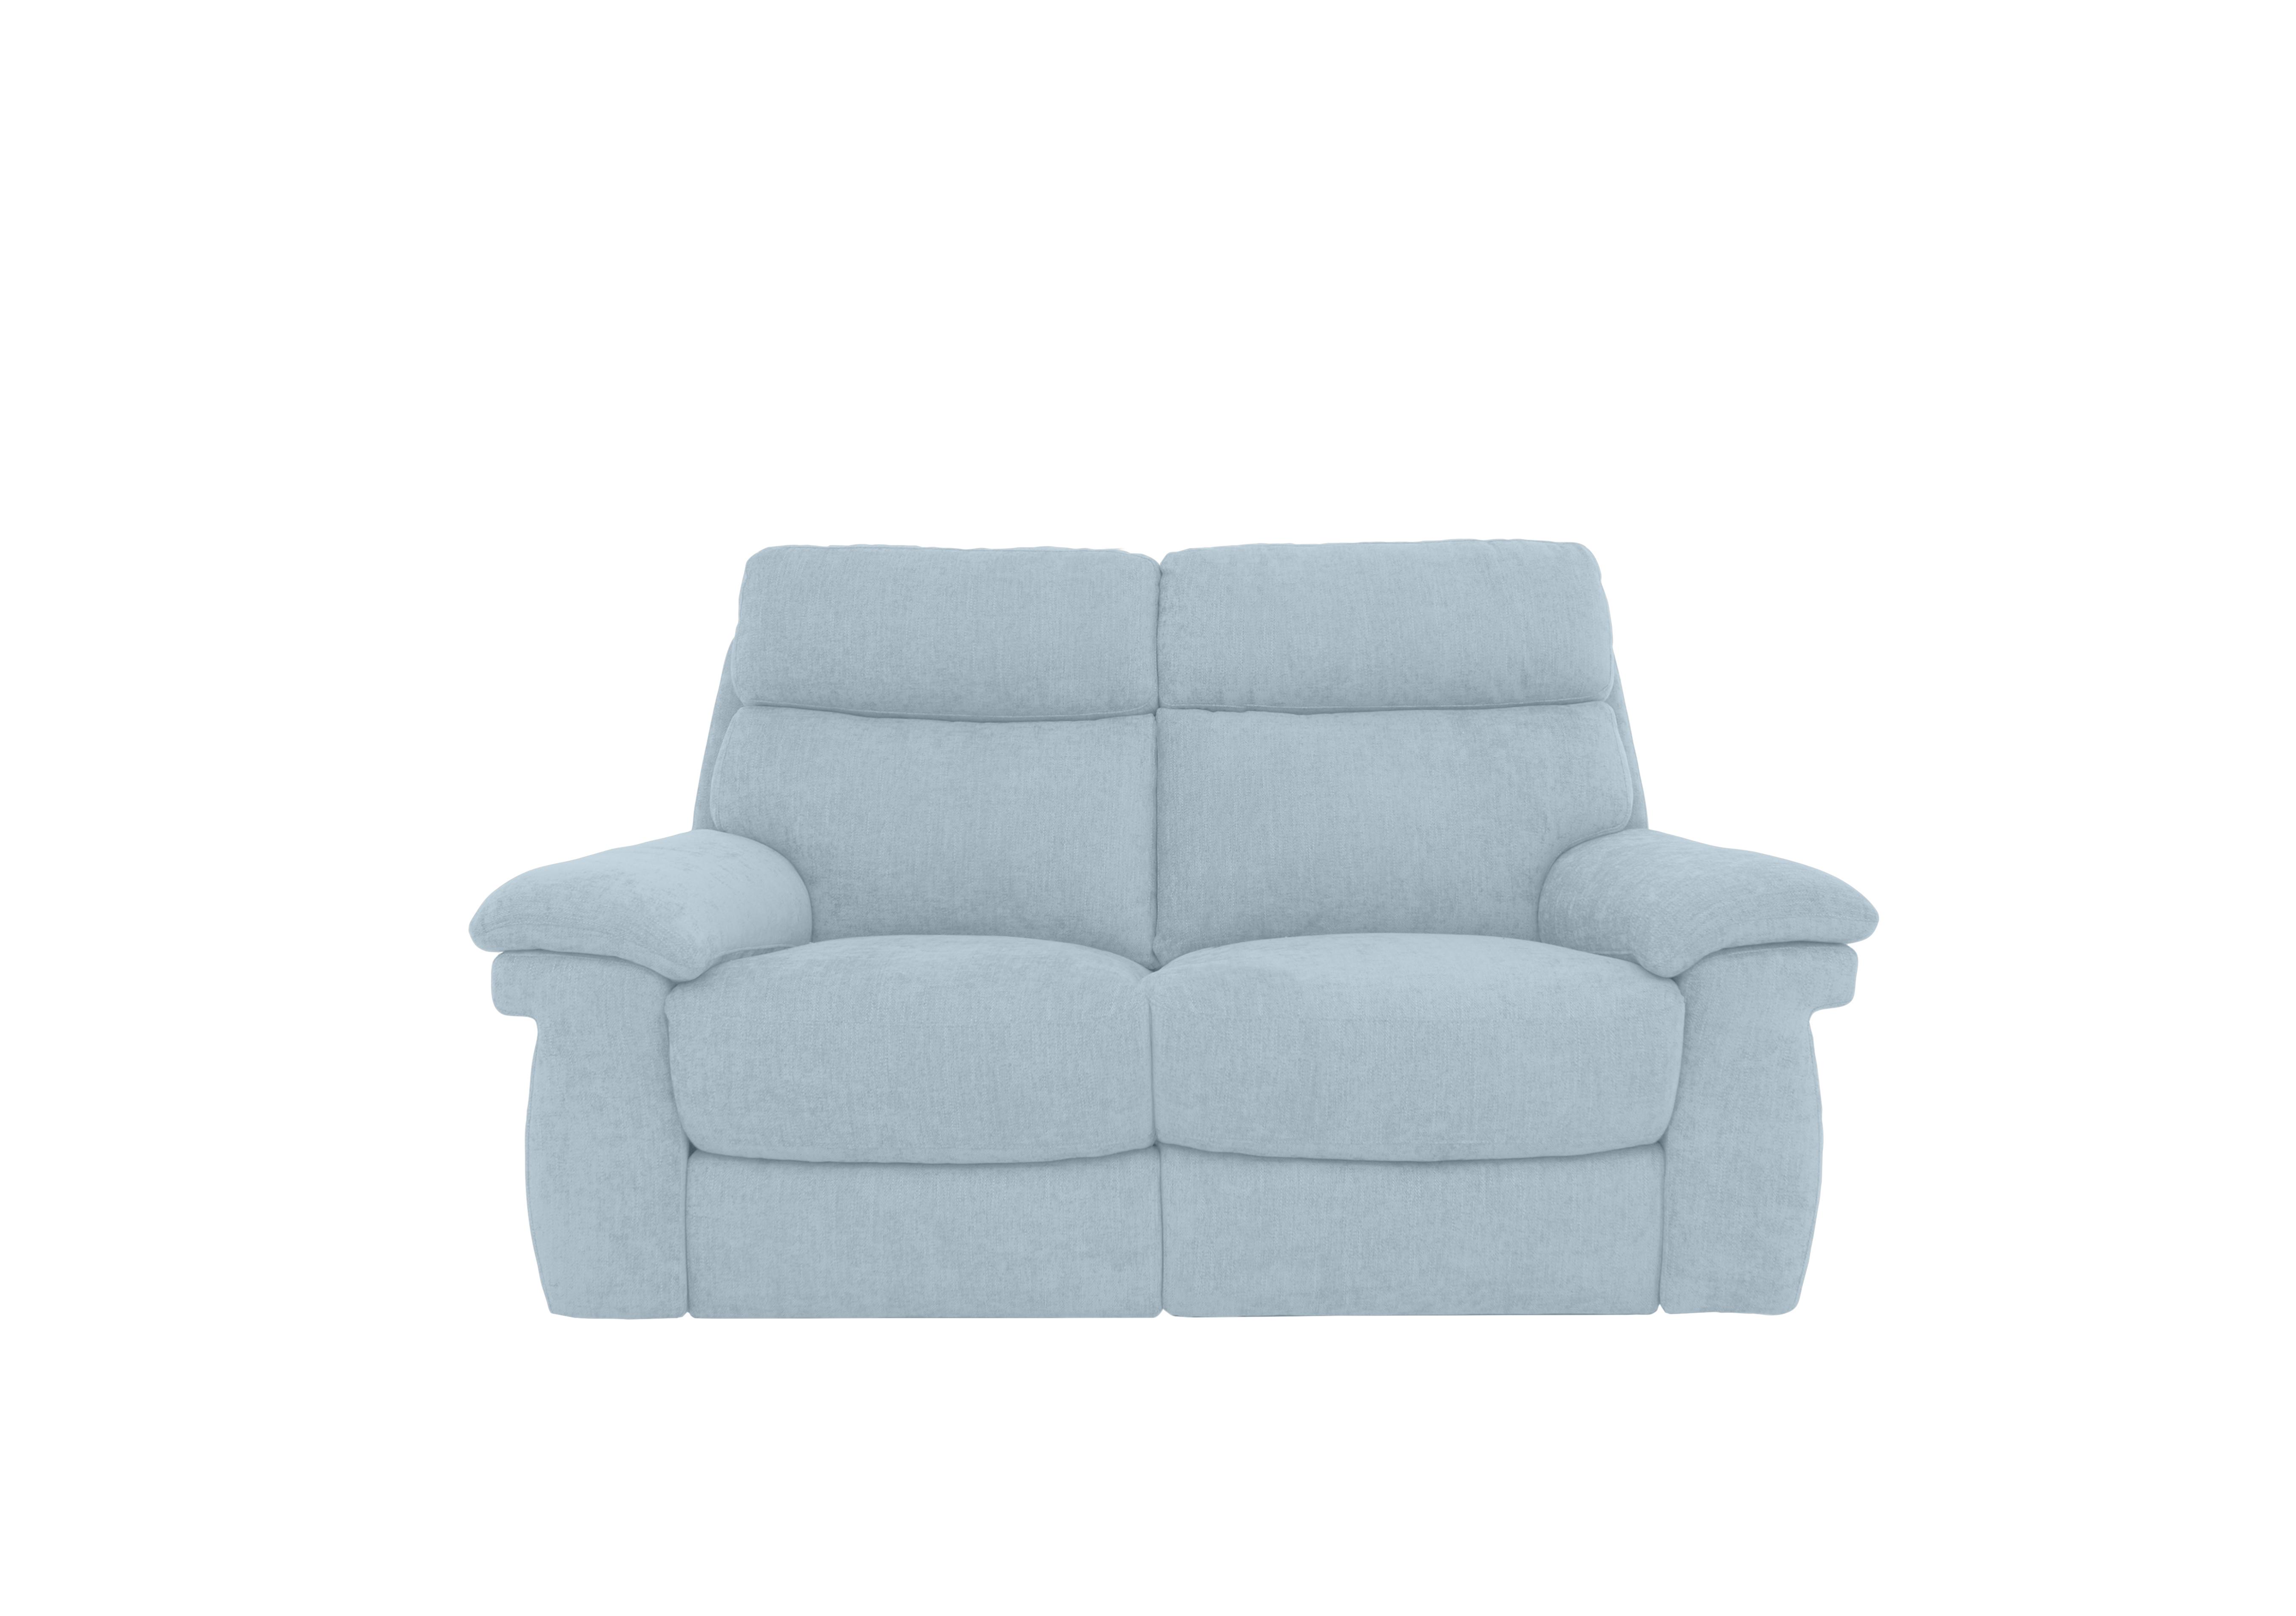 Serene 2 Seater Fabric Sofa in Fab-Meo-R17 Baby Blue on Furniture Village